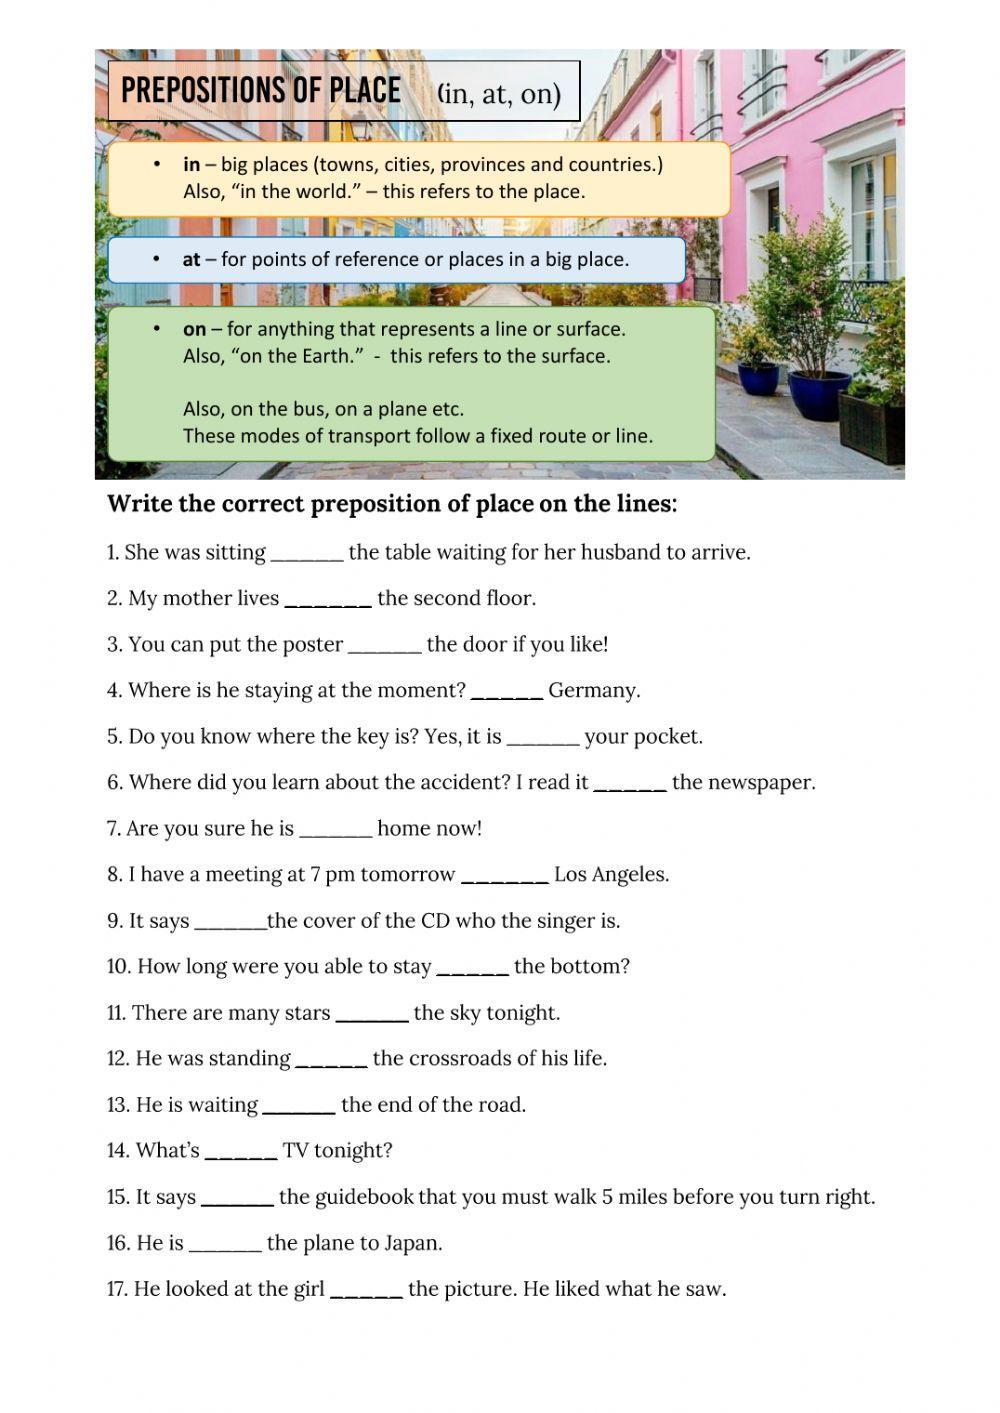 Prepositions of place - in, on, at